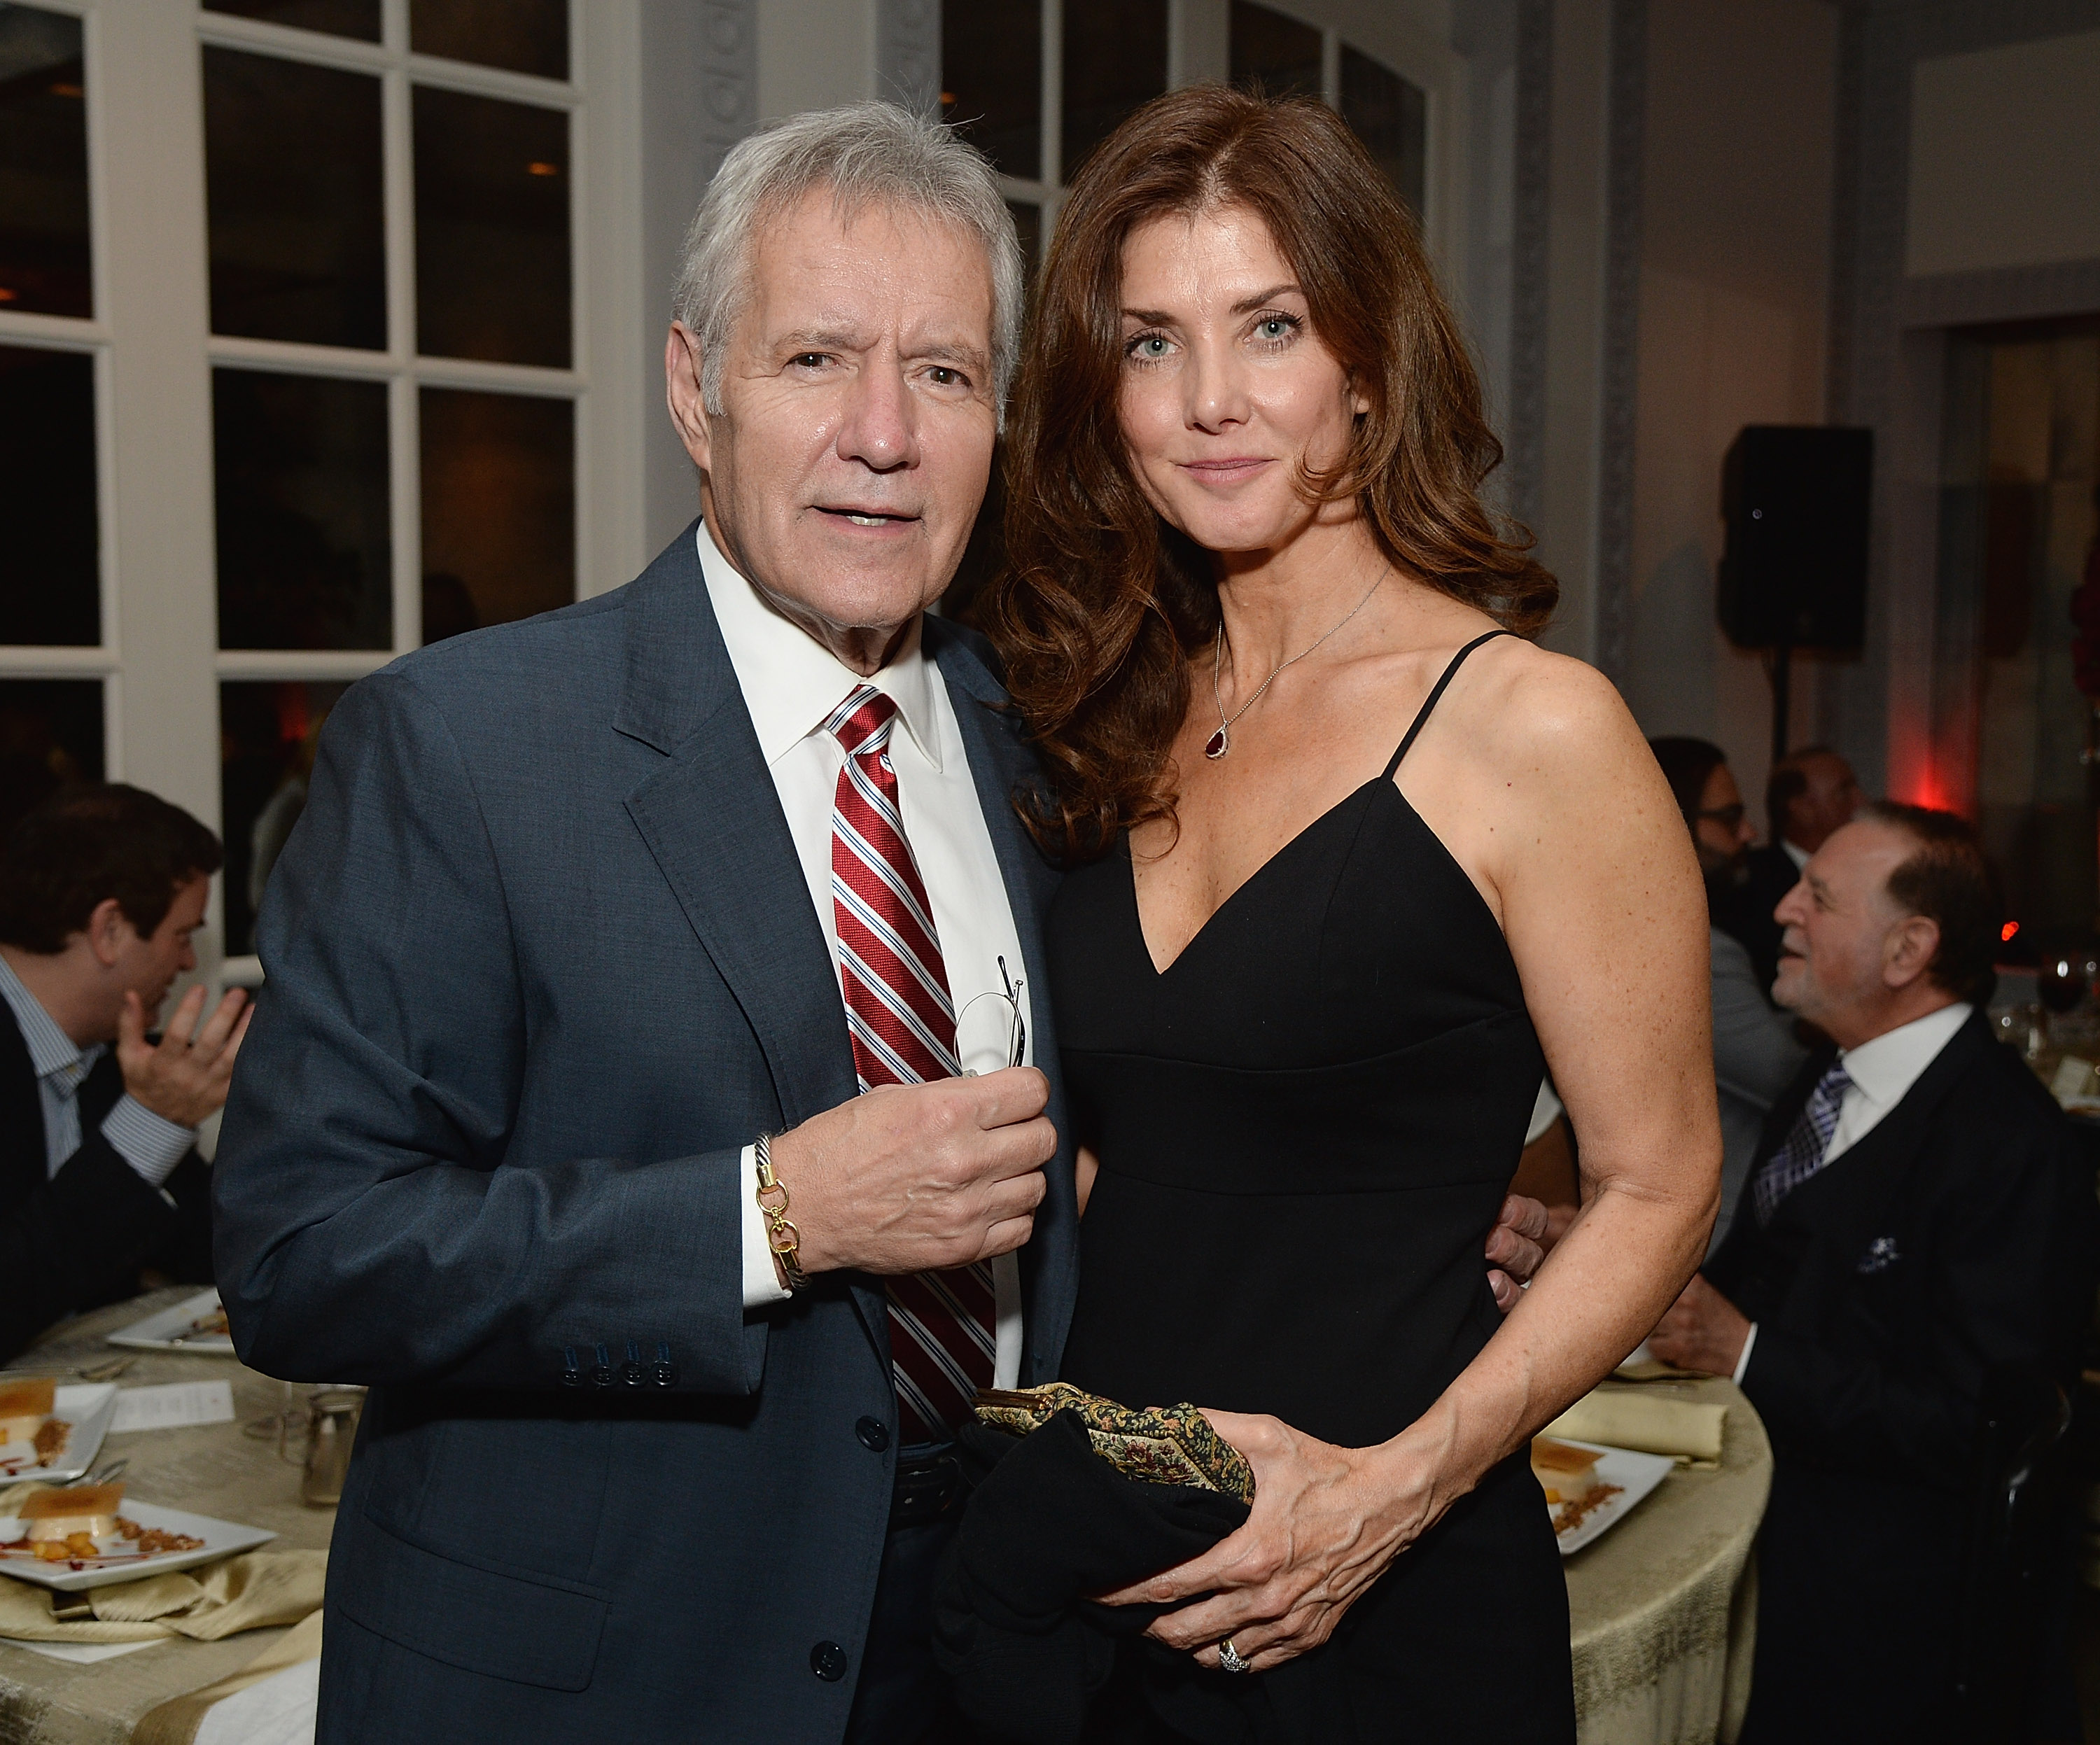 'Jeopardy!' star Alex Trebek and his wife, Jean Trebek smile for cameras as they attend the celebratory dinner after the special tribute to Sophia Loren during the AFI FEST 2014 presented by Audi at Dolby Theatre 